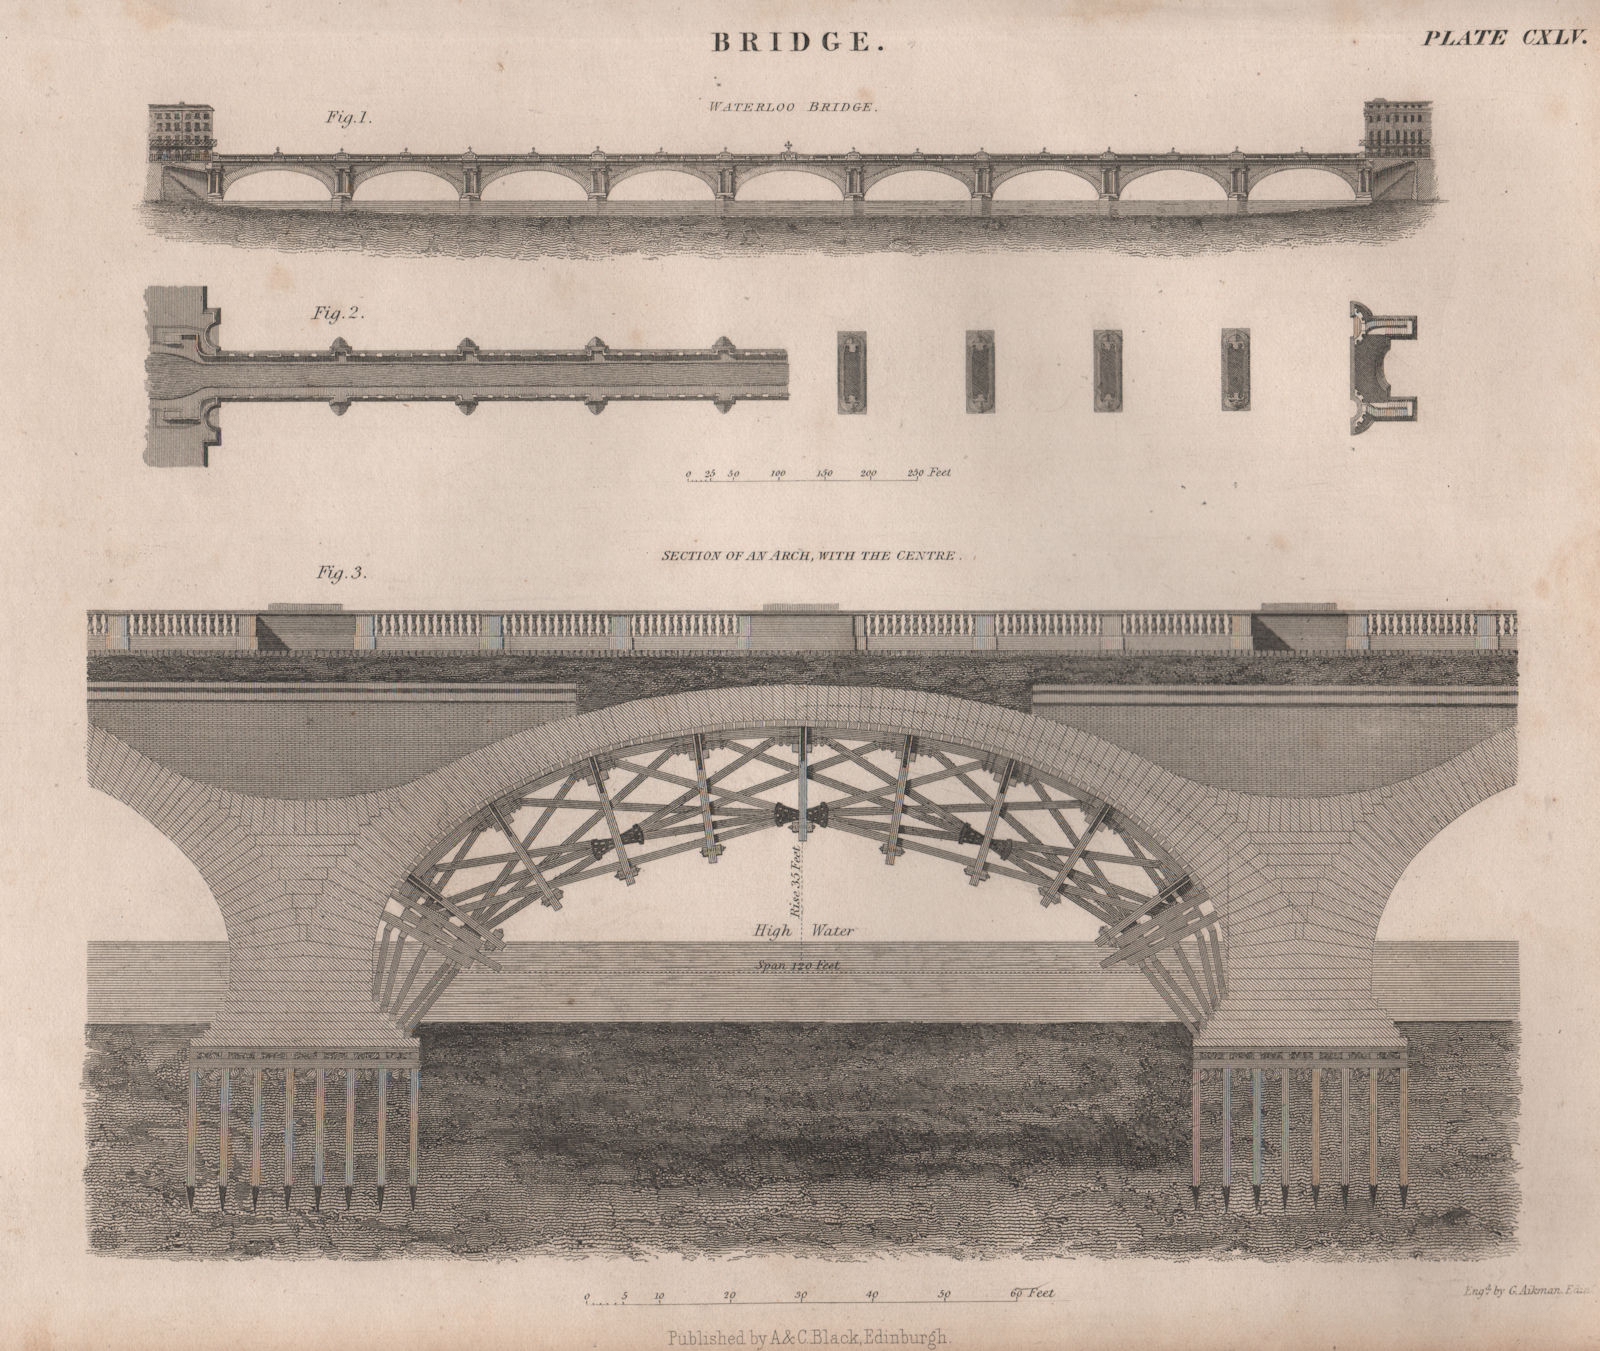 Associate Product Old Waterloo Bridge, London. Section of an Arch with the centre. BRITANNICA 1860